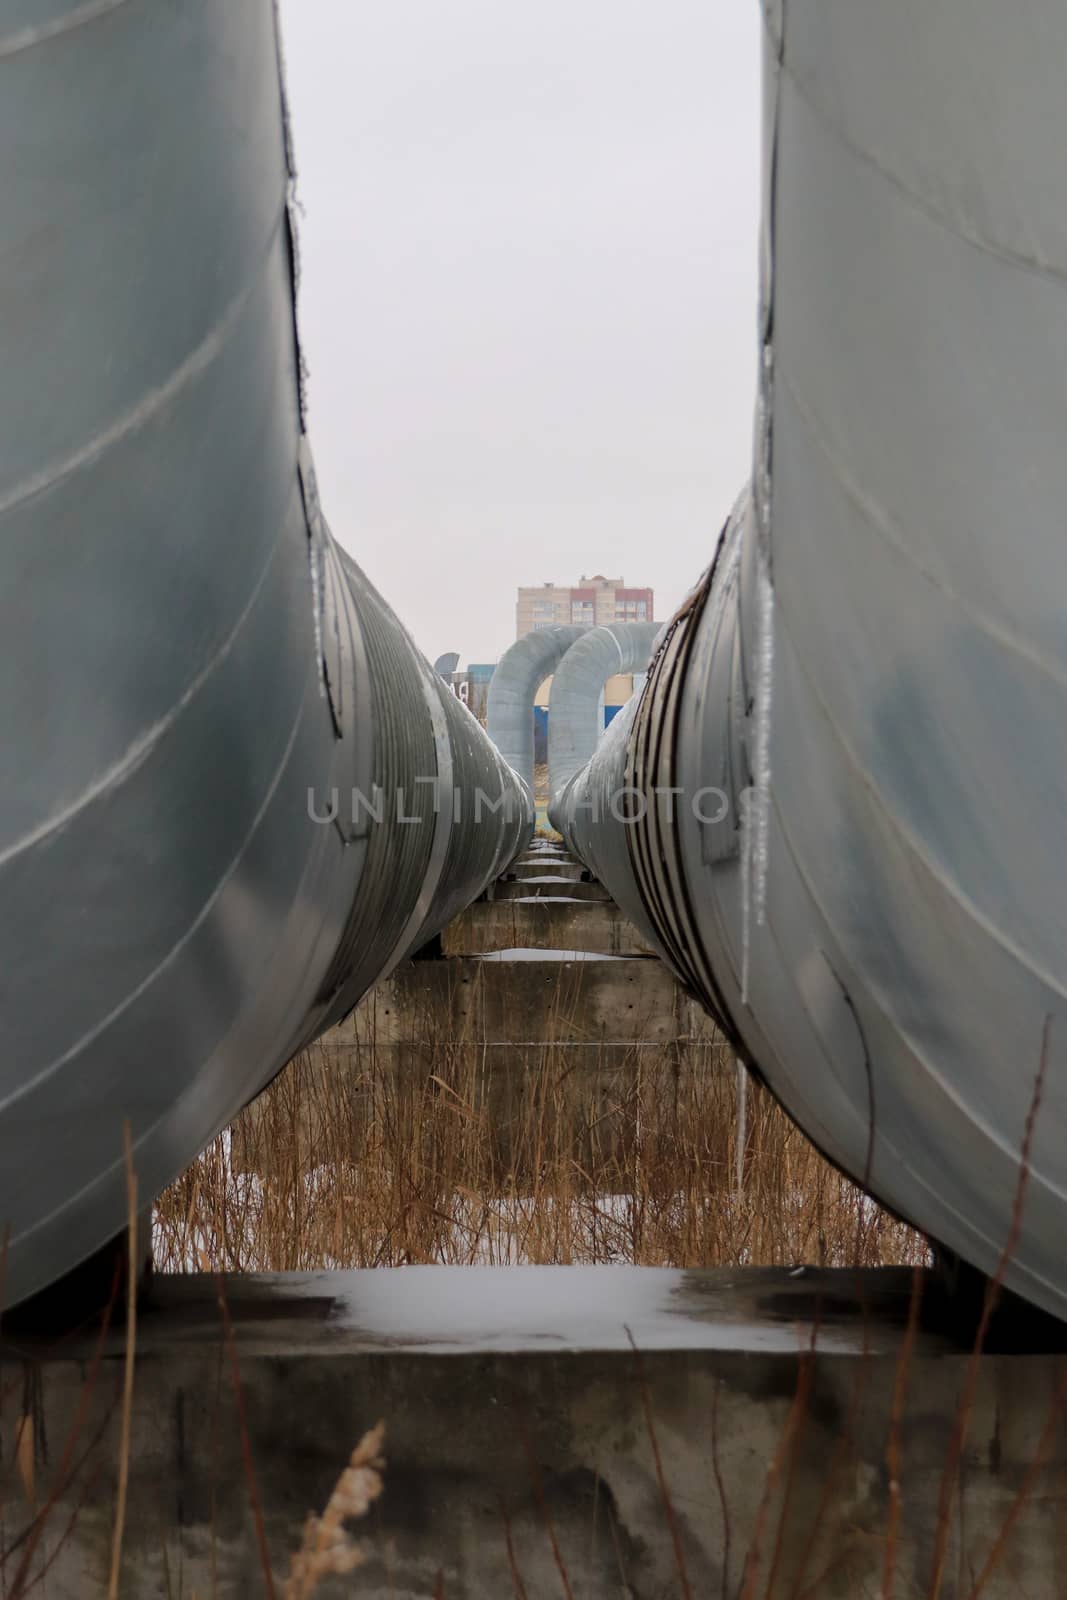 Two metal pipes with clearance departing into the distance background.Two metal pipes with clearance departing into the distance. House on background.